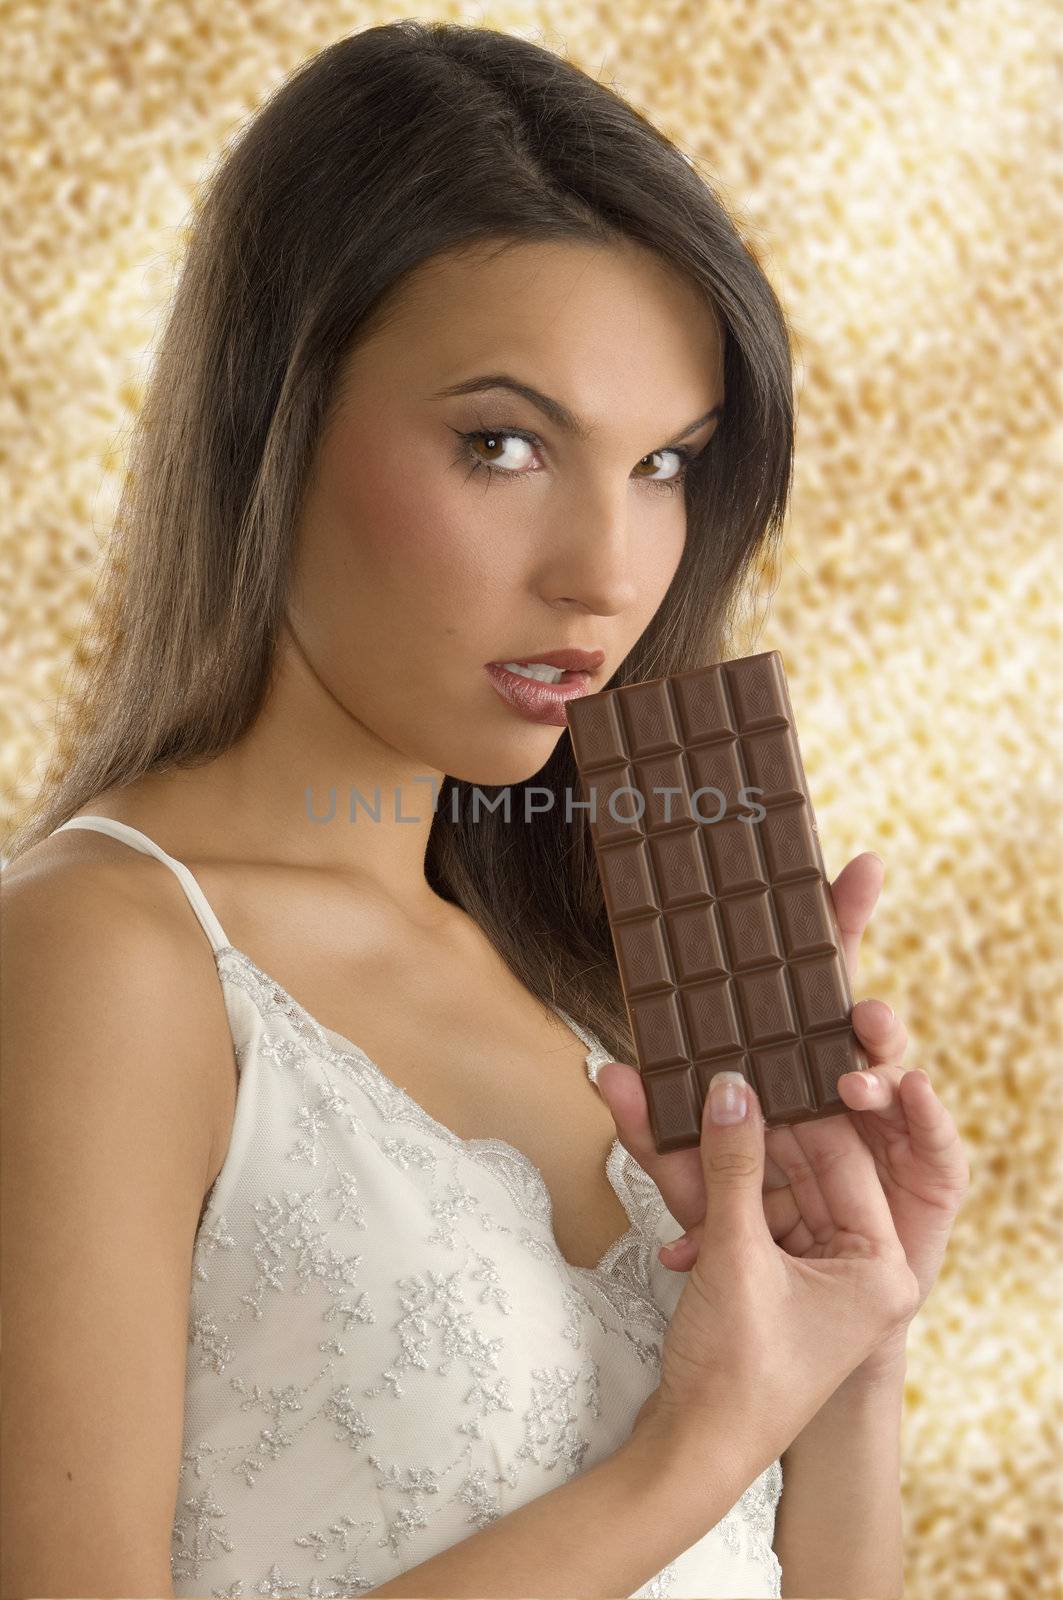 block chocolate by fotoCD